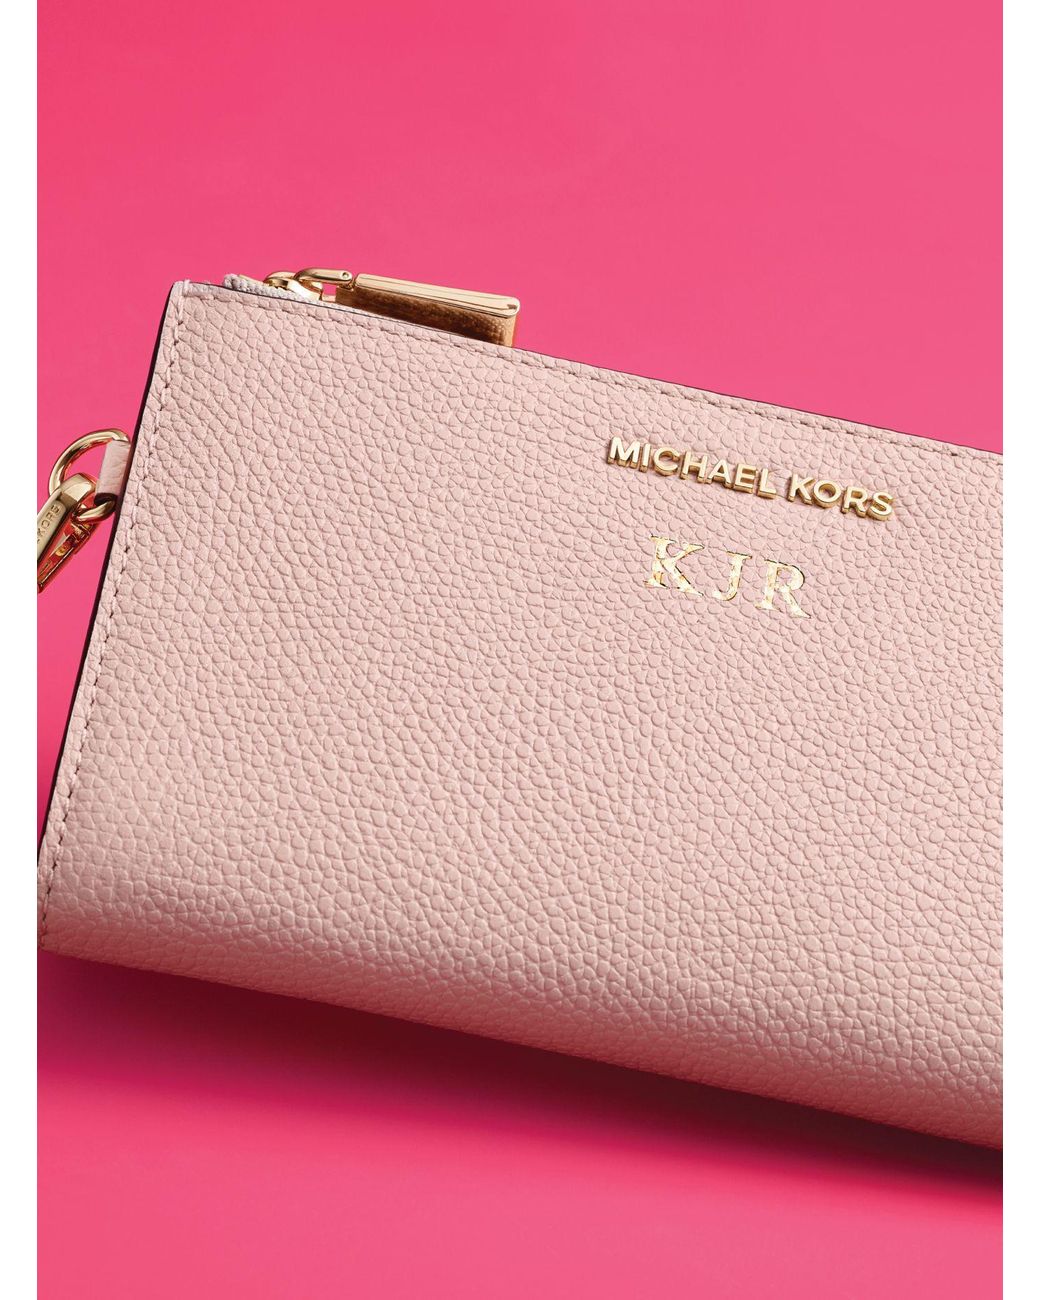 Michael Kors Adele Leather Smartphone Wallet in Pink | Lyst